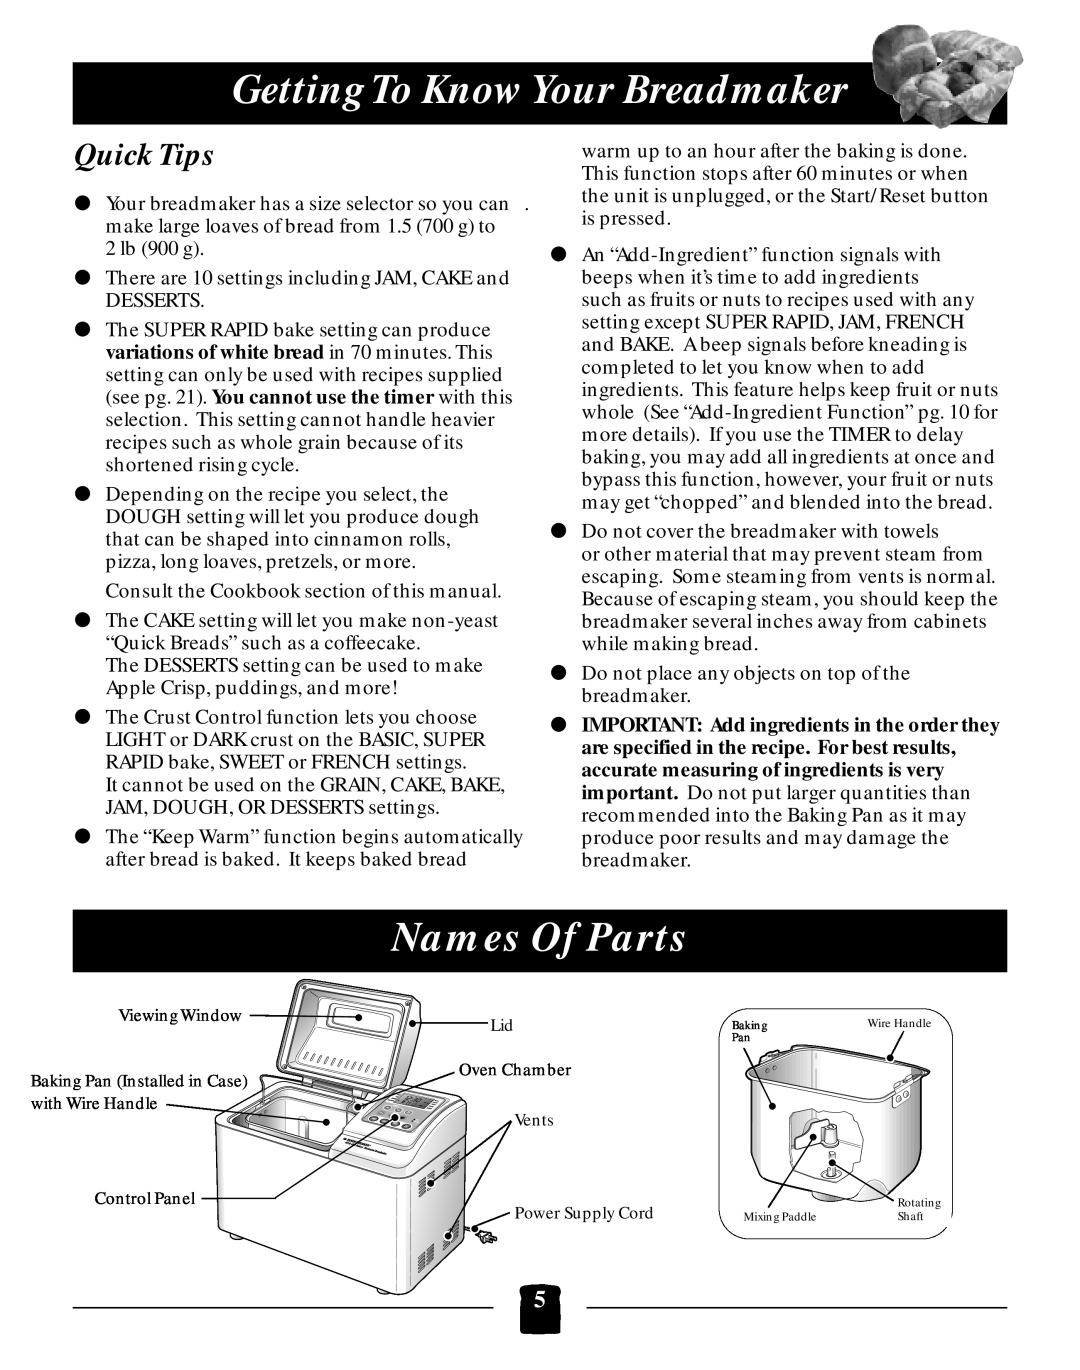 Black & Decker B2005 manual Getting To KnowYour Breadmaker, Names Of Parts, Quick Tips 